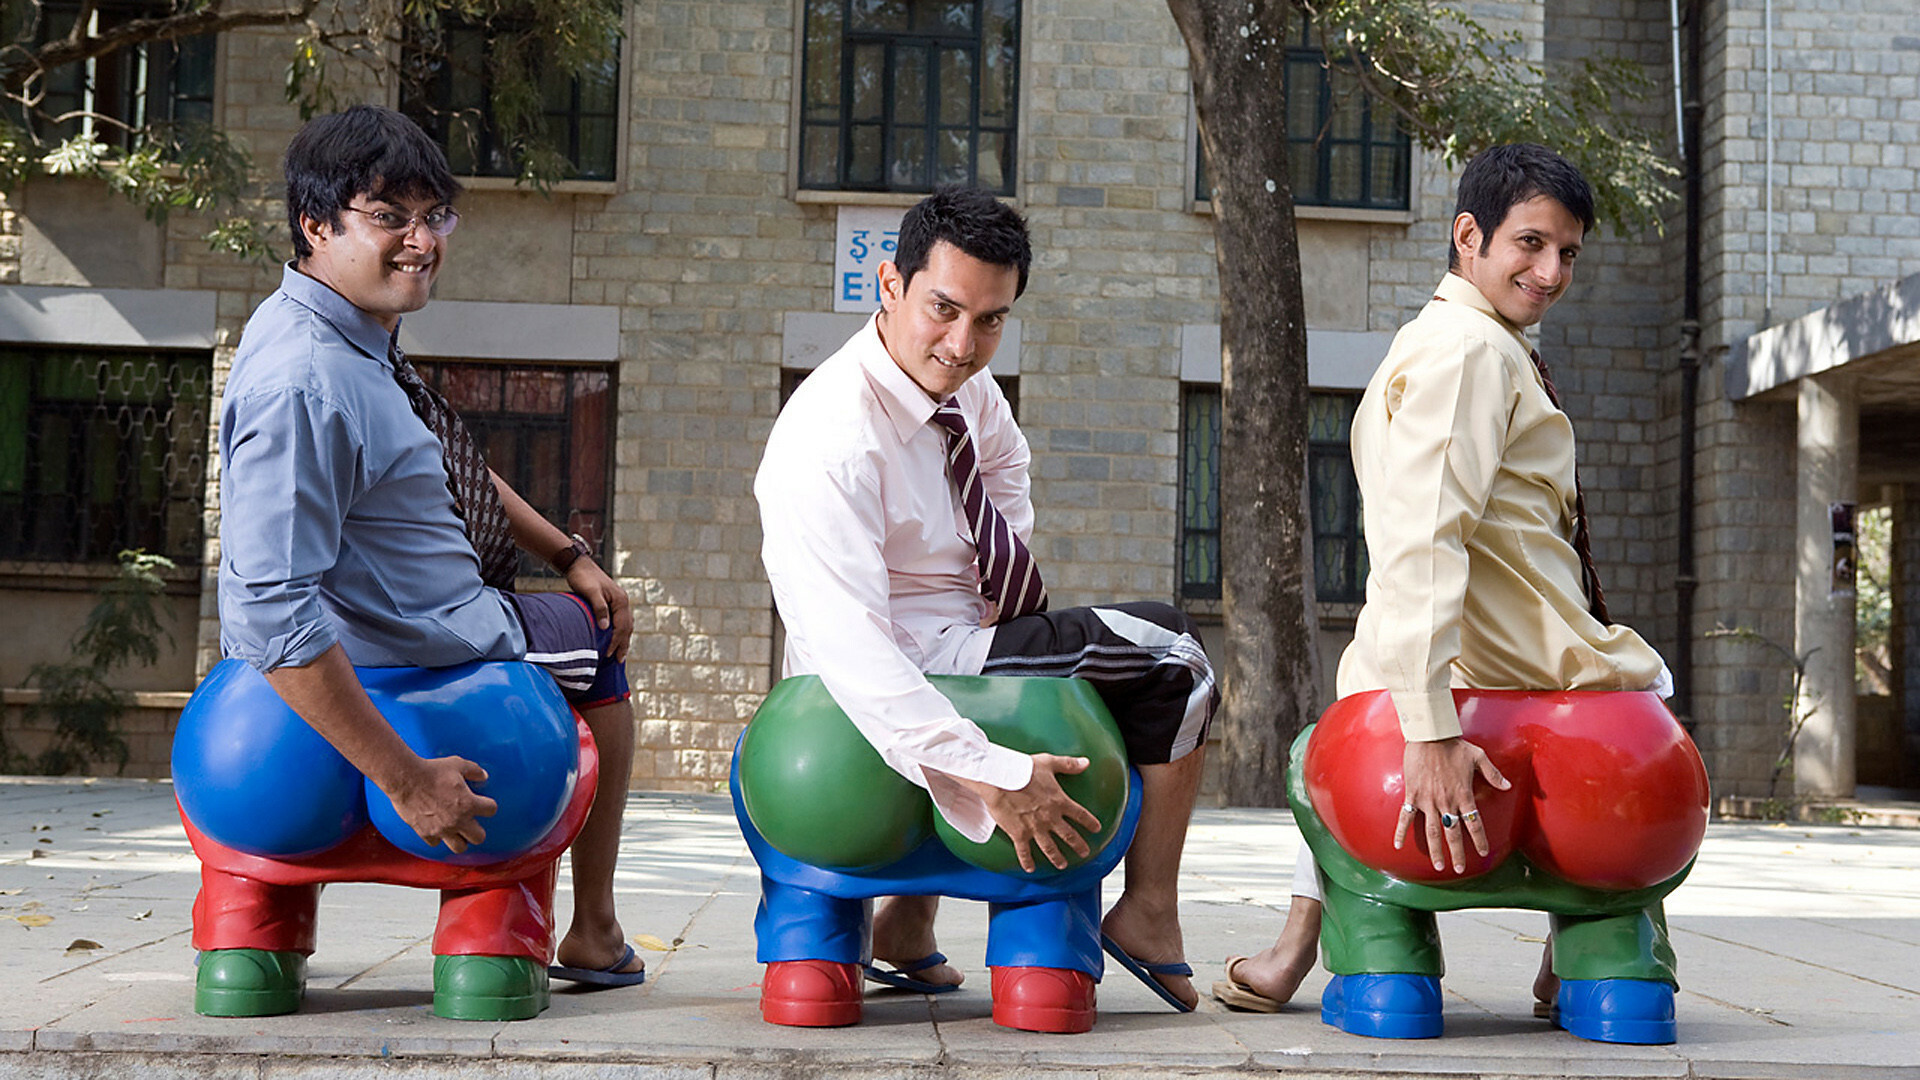 3 idiots: It was the highest-grossing Indian film ever at the time. 1920x1080 Full HD Wallpaper.